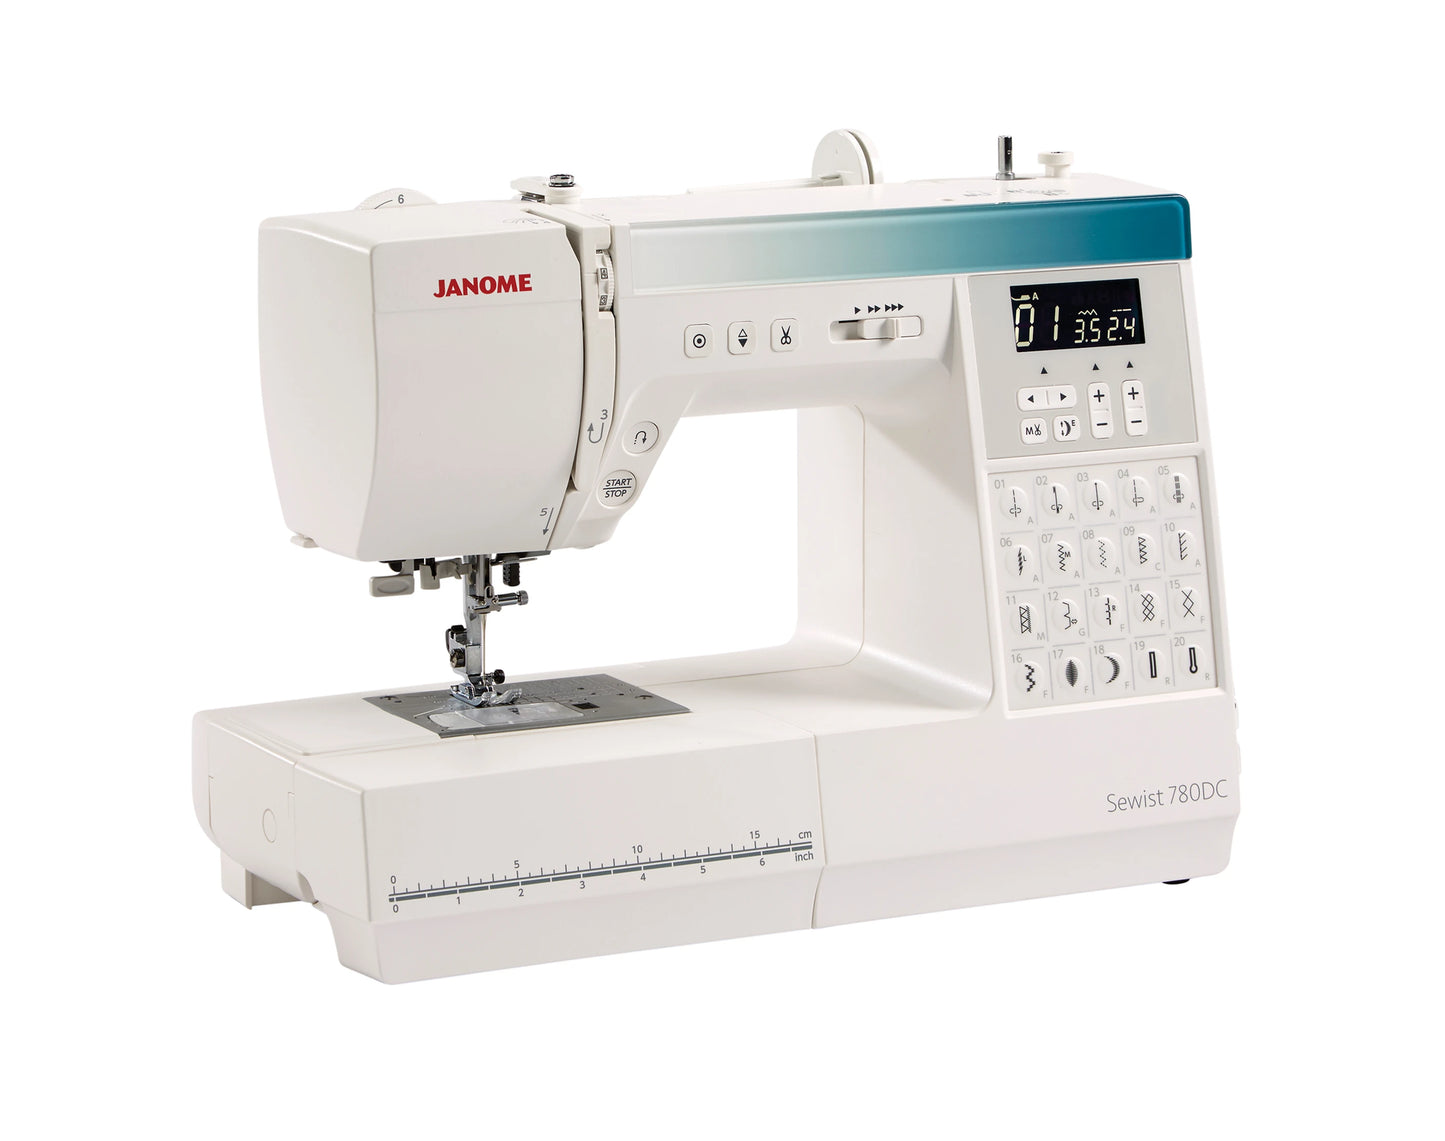 The Janome Sewist 780DC - Retail Price £679.00.